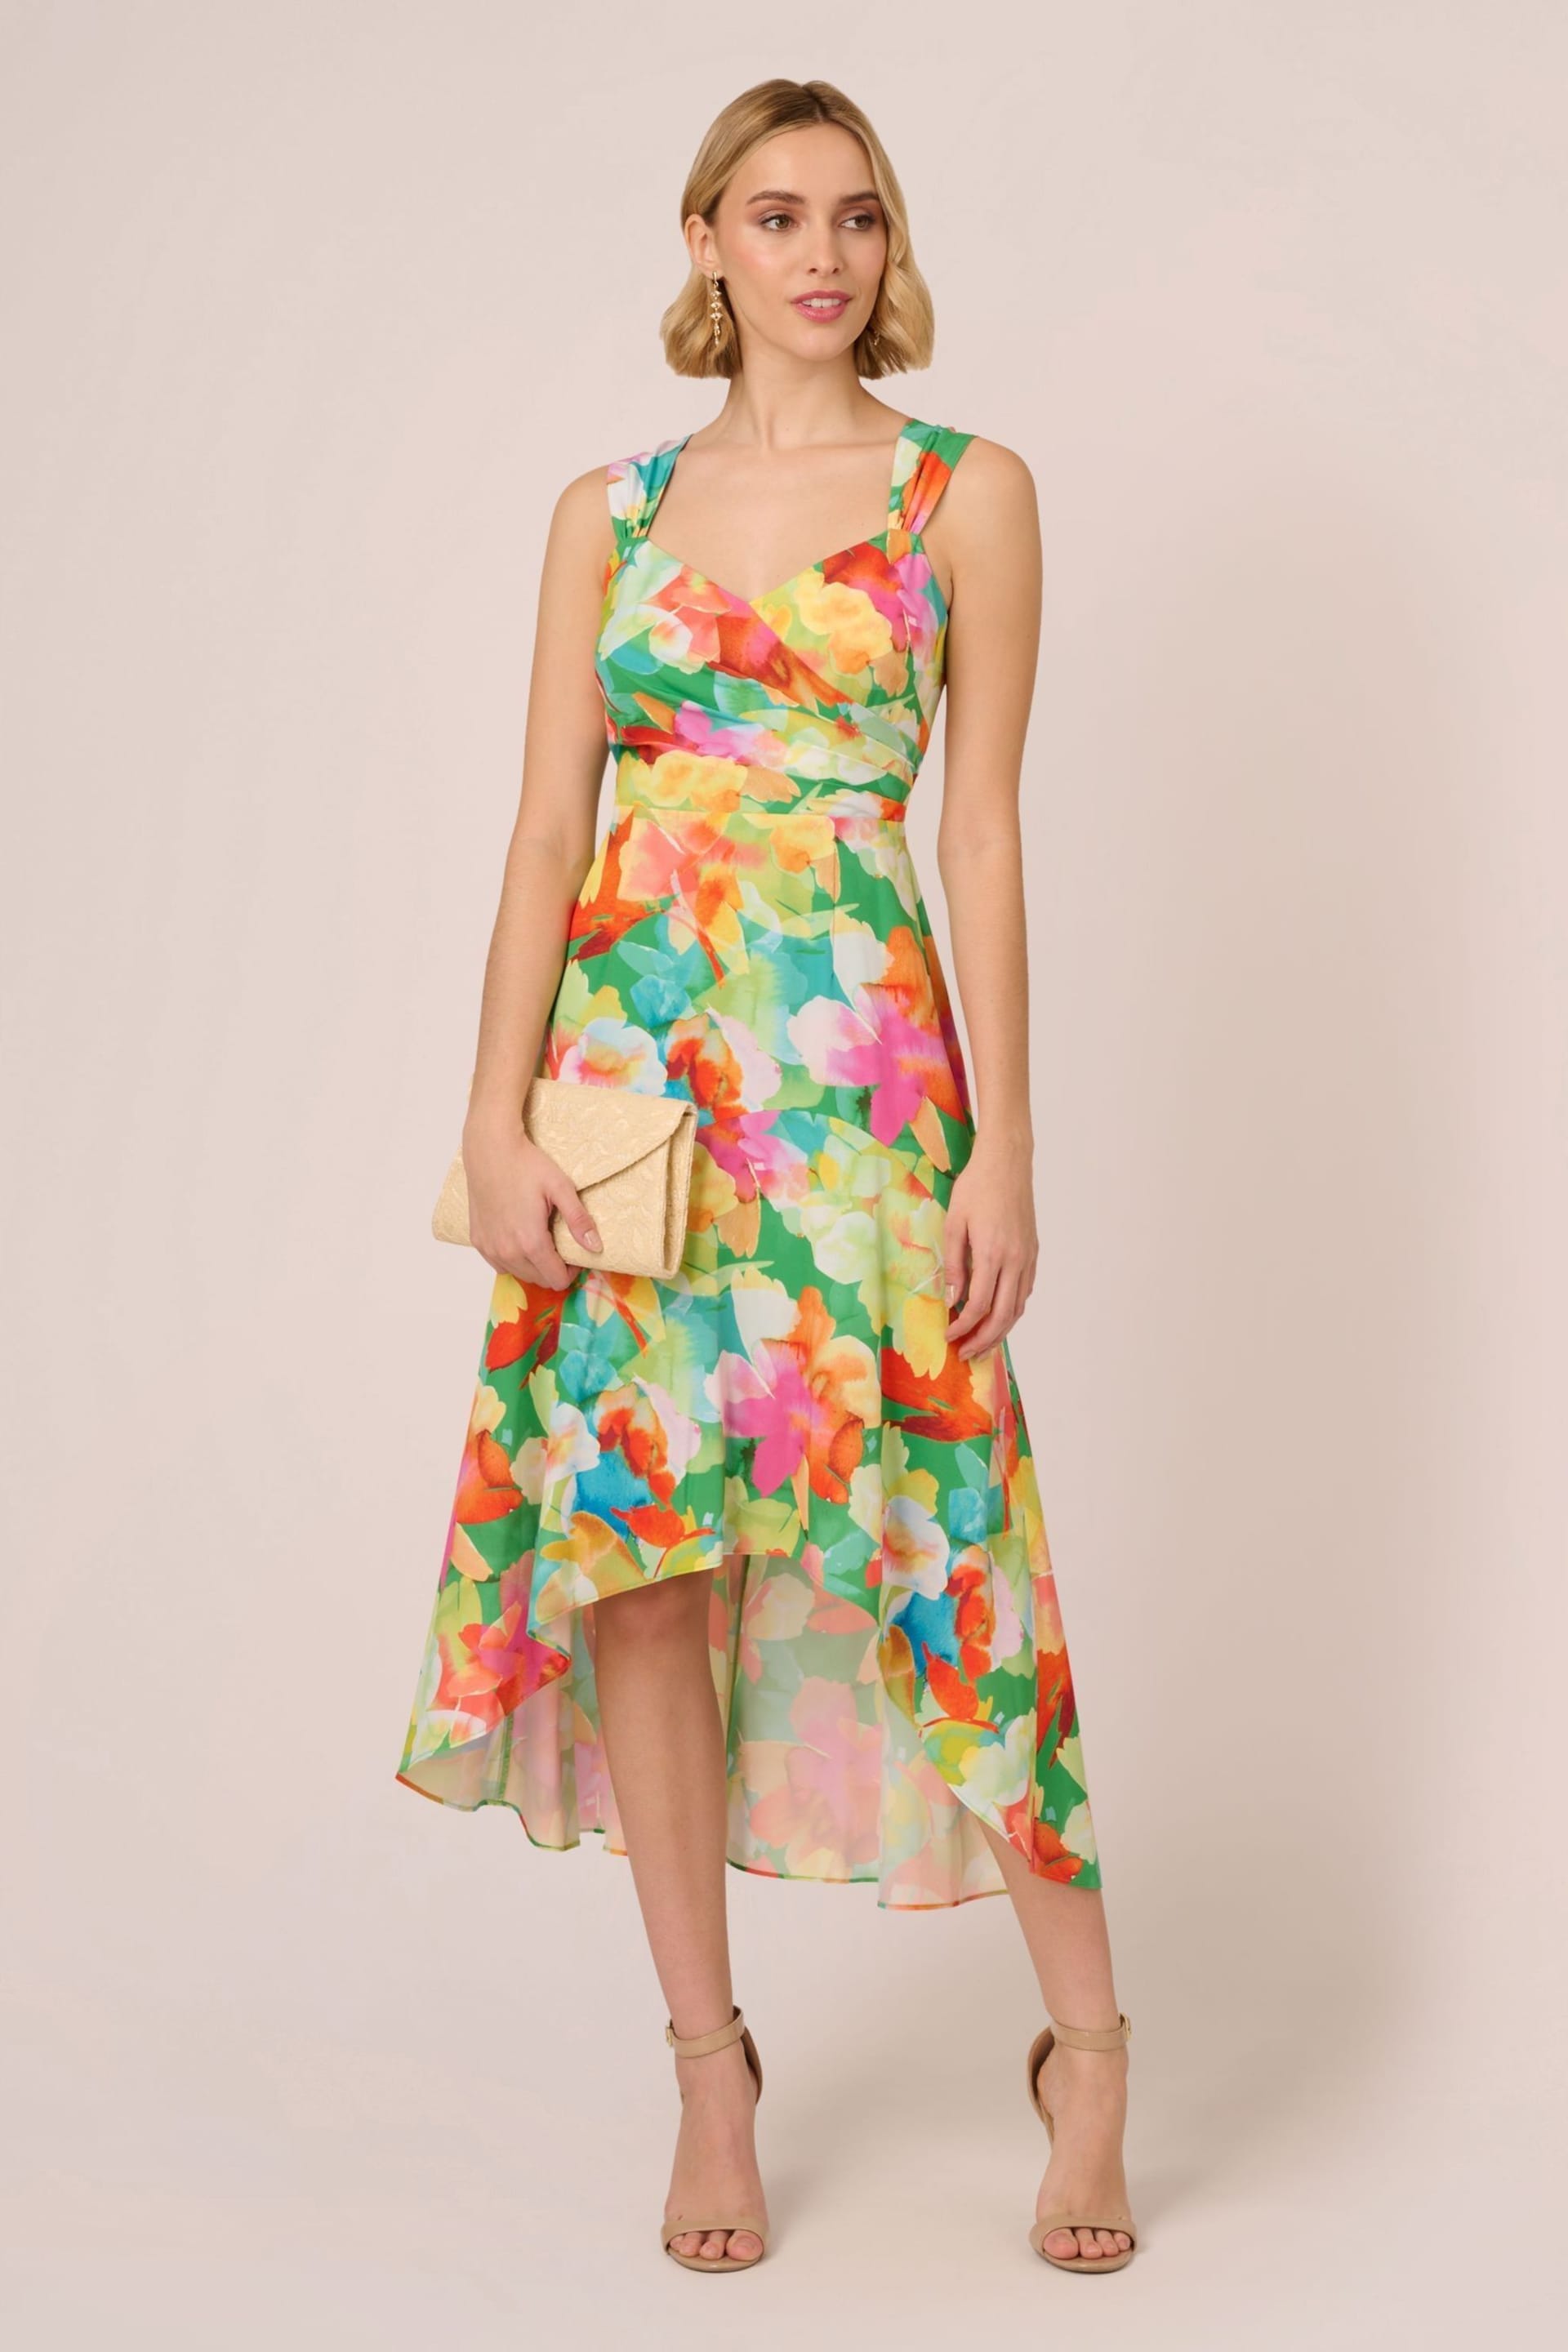 Adrianna Papell Multi Printed Hi-Low Dress - Image 3 of 7